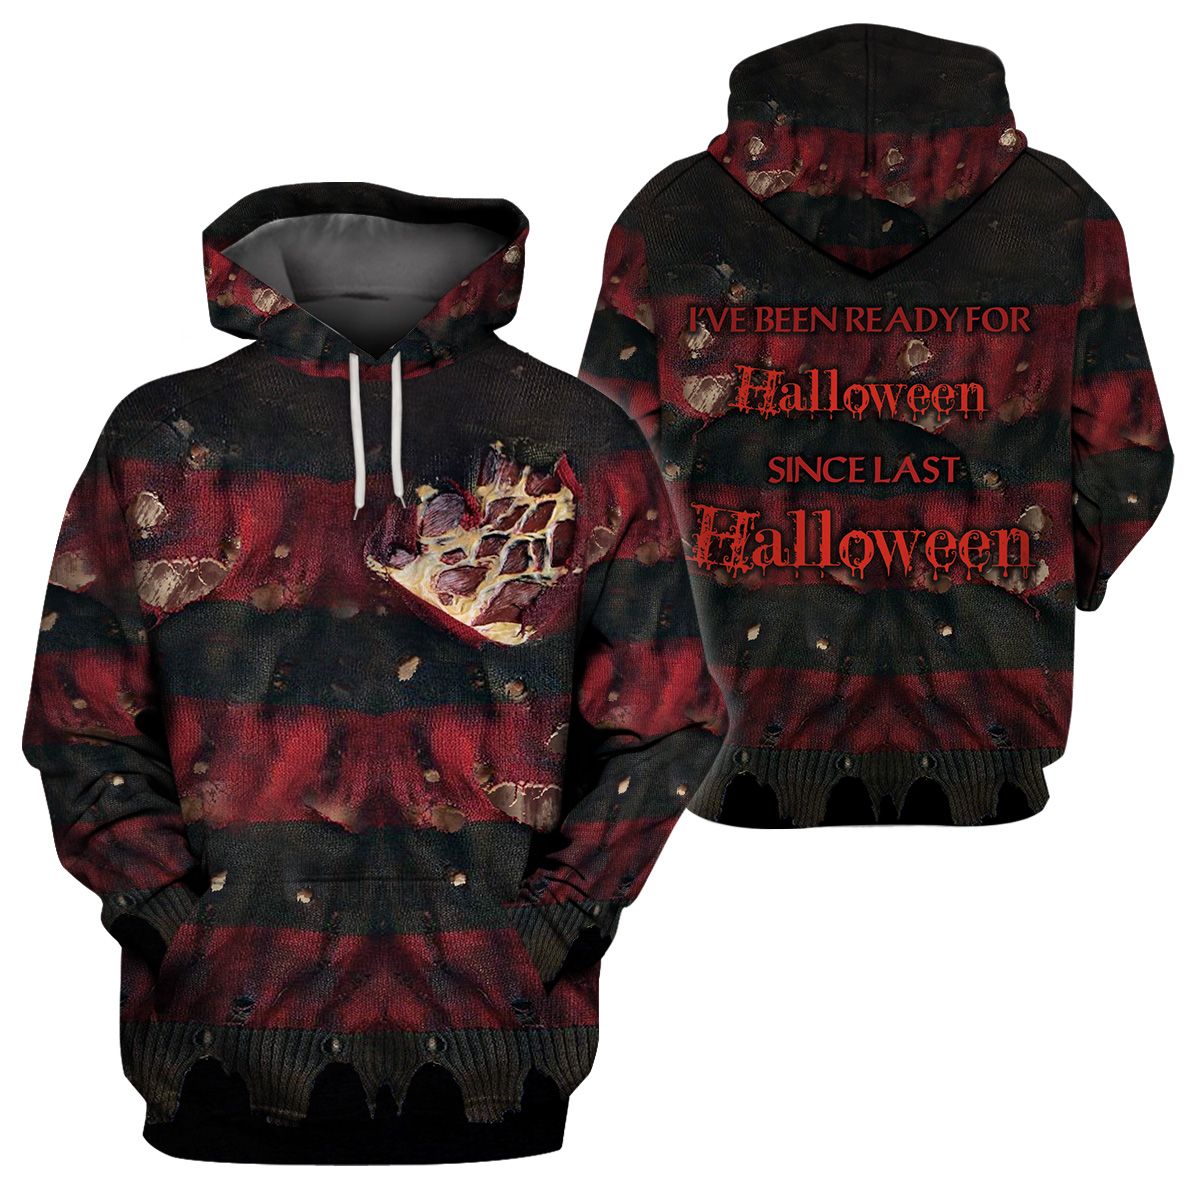 Freddy Krueger I have been ready Halloween since last Halloween 3d hoodie and shirt